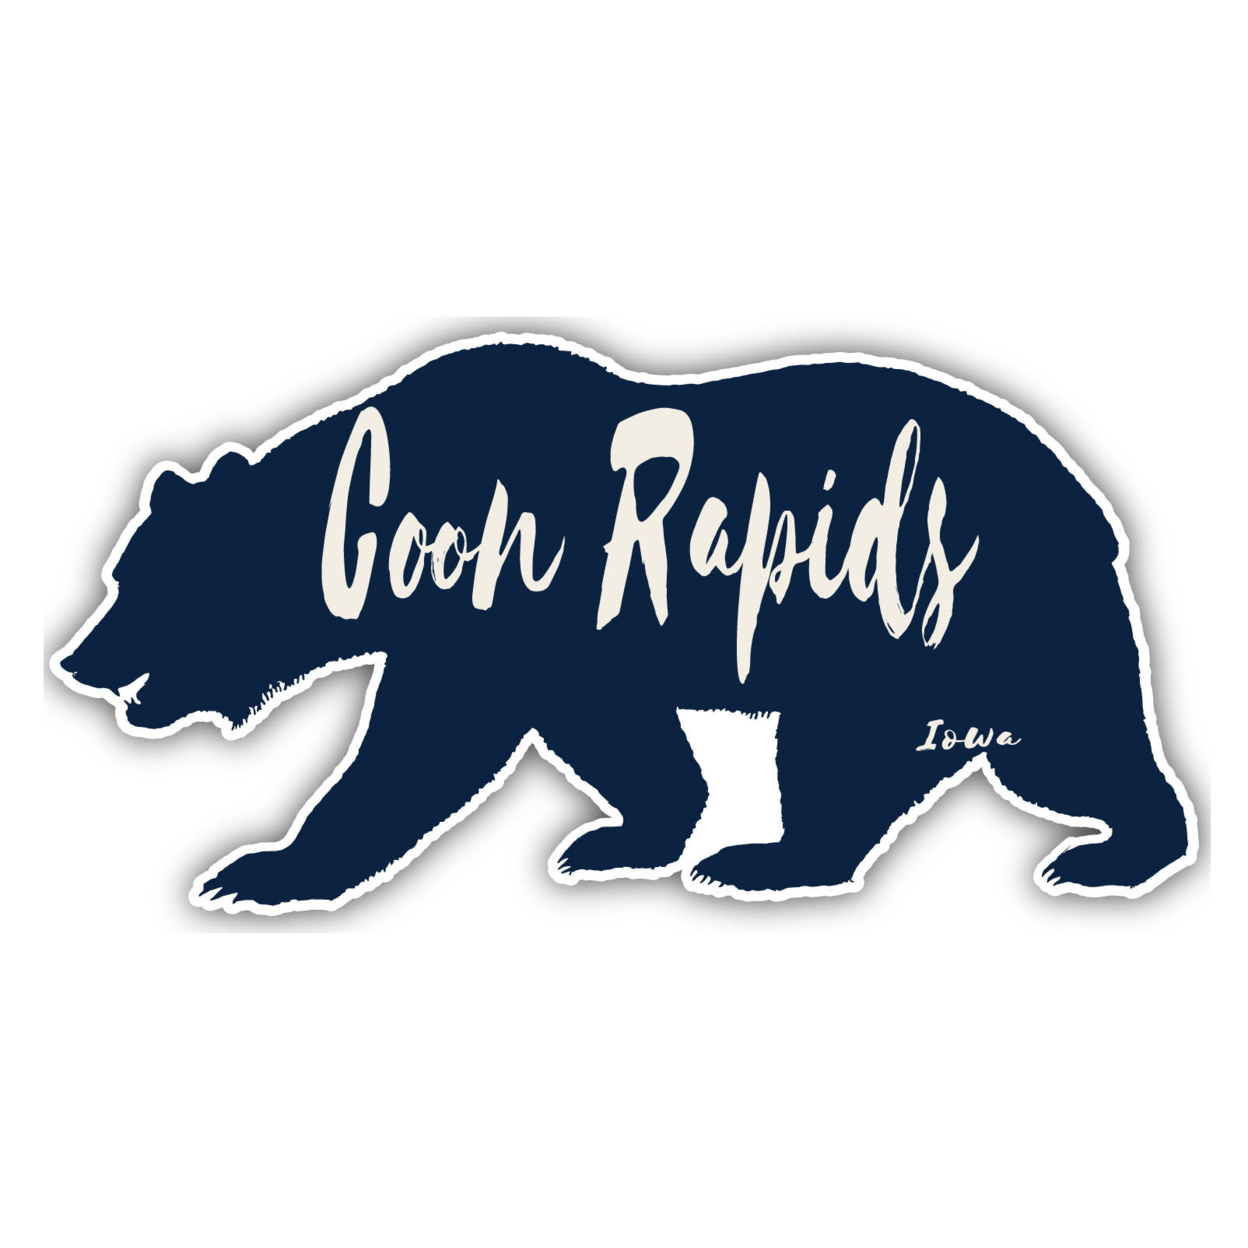 Coon Rapids Iowa Souvenir Decorative Stickers (Choose Theme And Size) - 4-Pack, 8-Inch, Bear